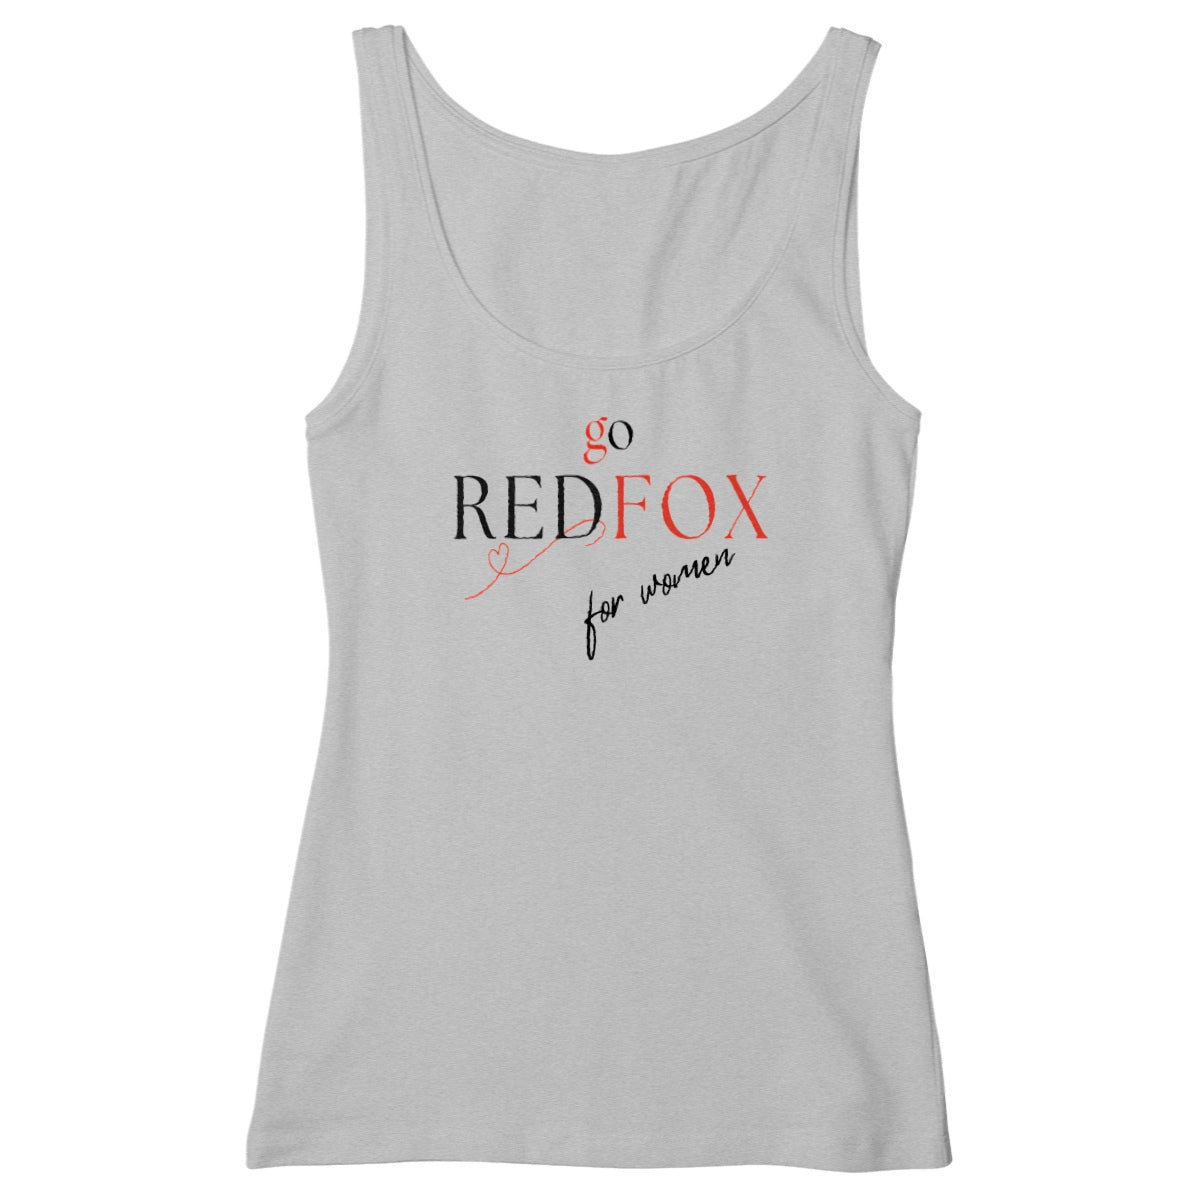 Women's Fitted Tank